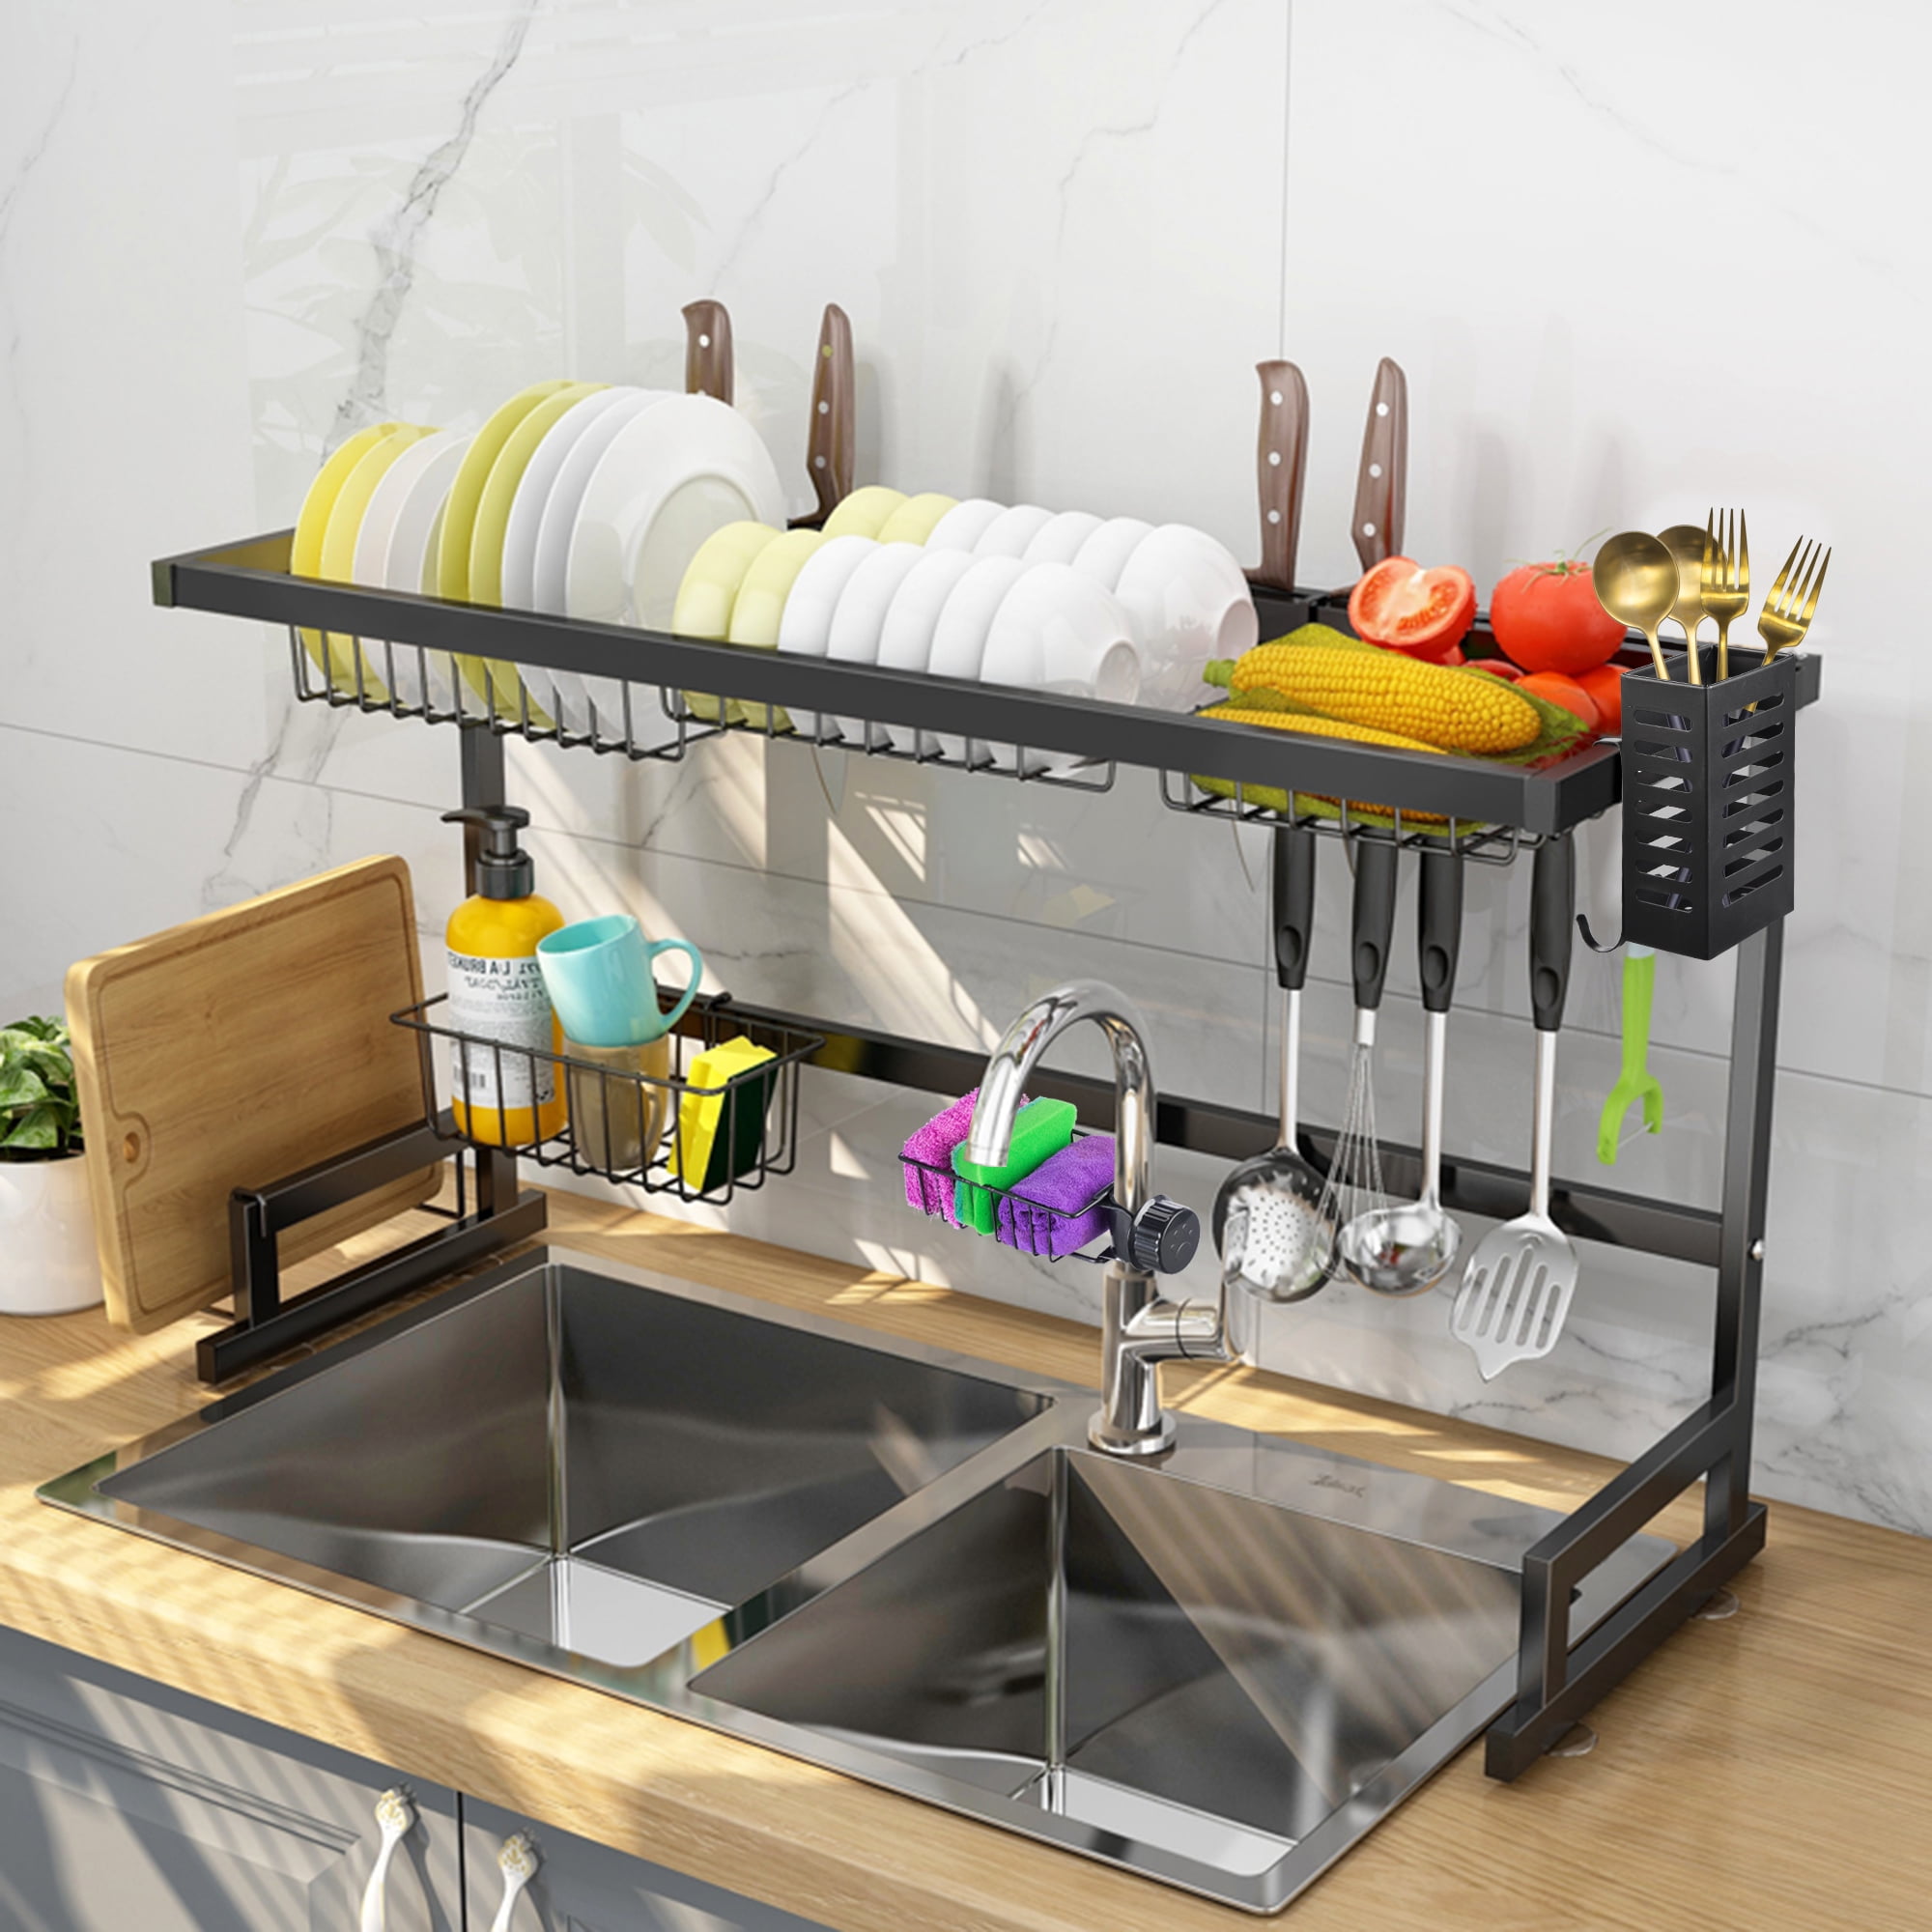 Large Capacity Over Sink Dish Drying Rack Drainer Shelf Stainless Steel 